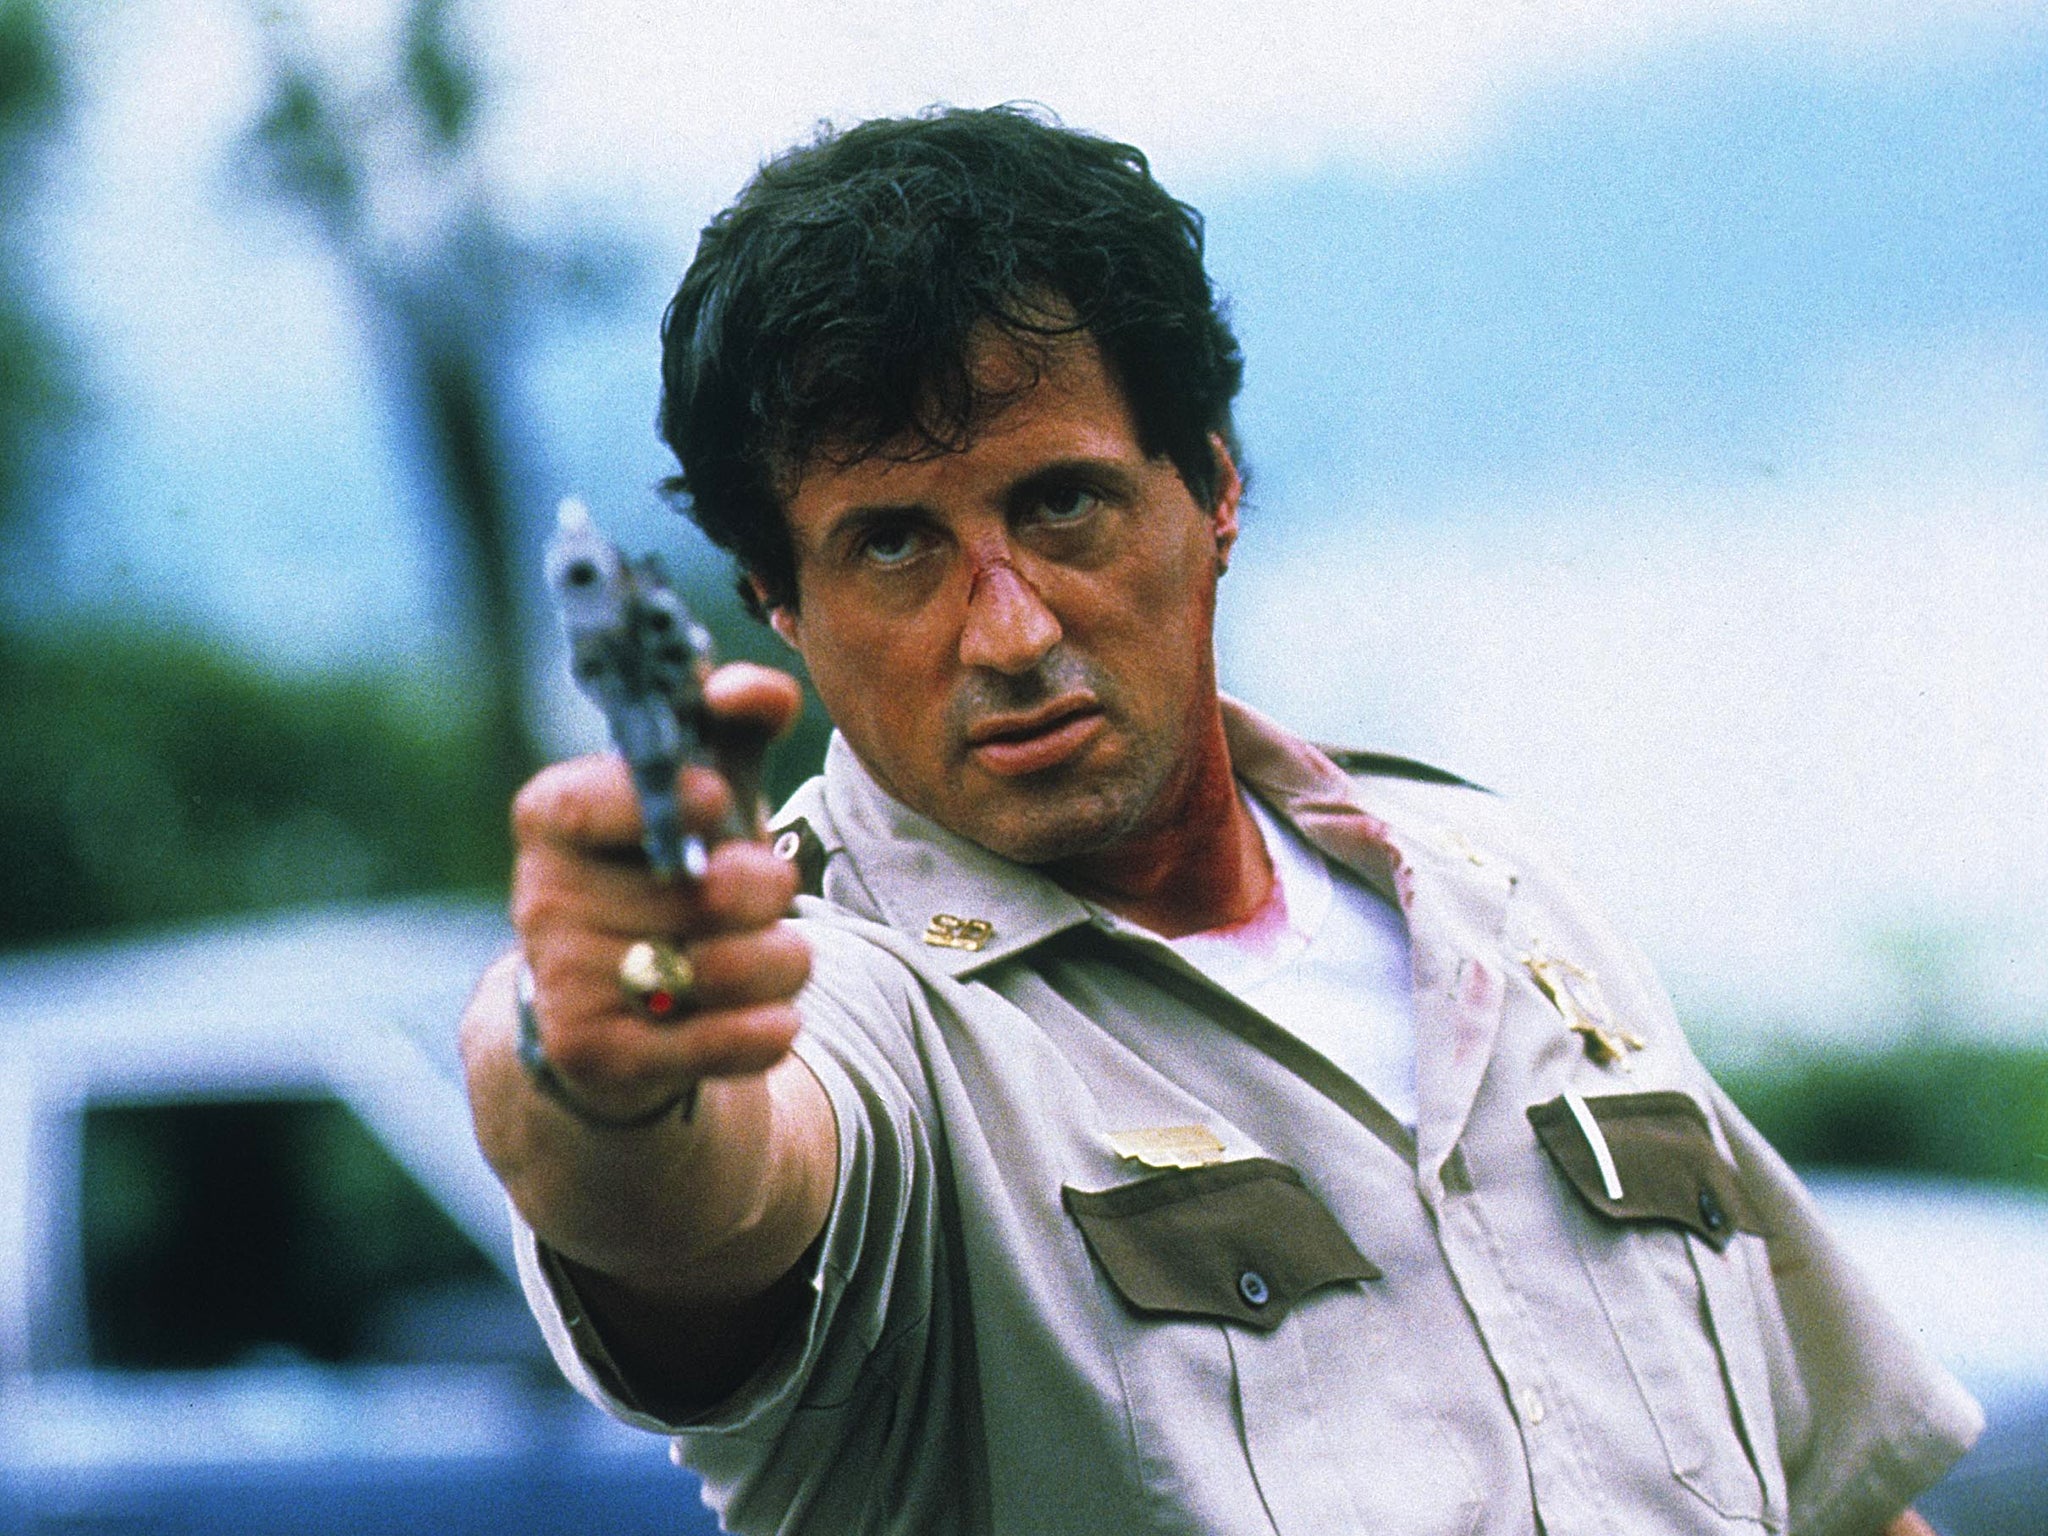 Miramax had been hoping that ‘Cop Land’ would do for Sylvester Stallone what the company’s earlier film, ‘Pulp Fiction’ (1994), had done for John Travolta